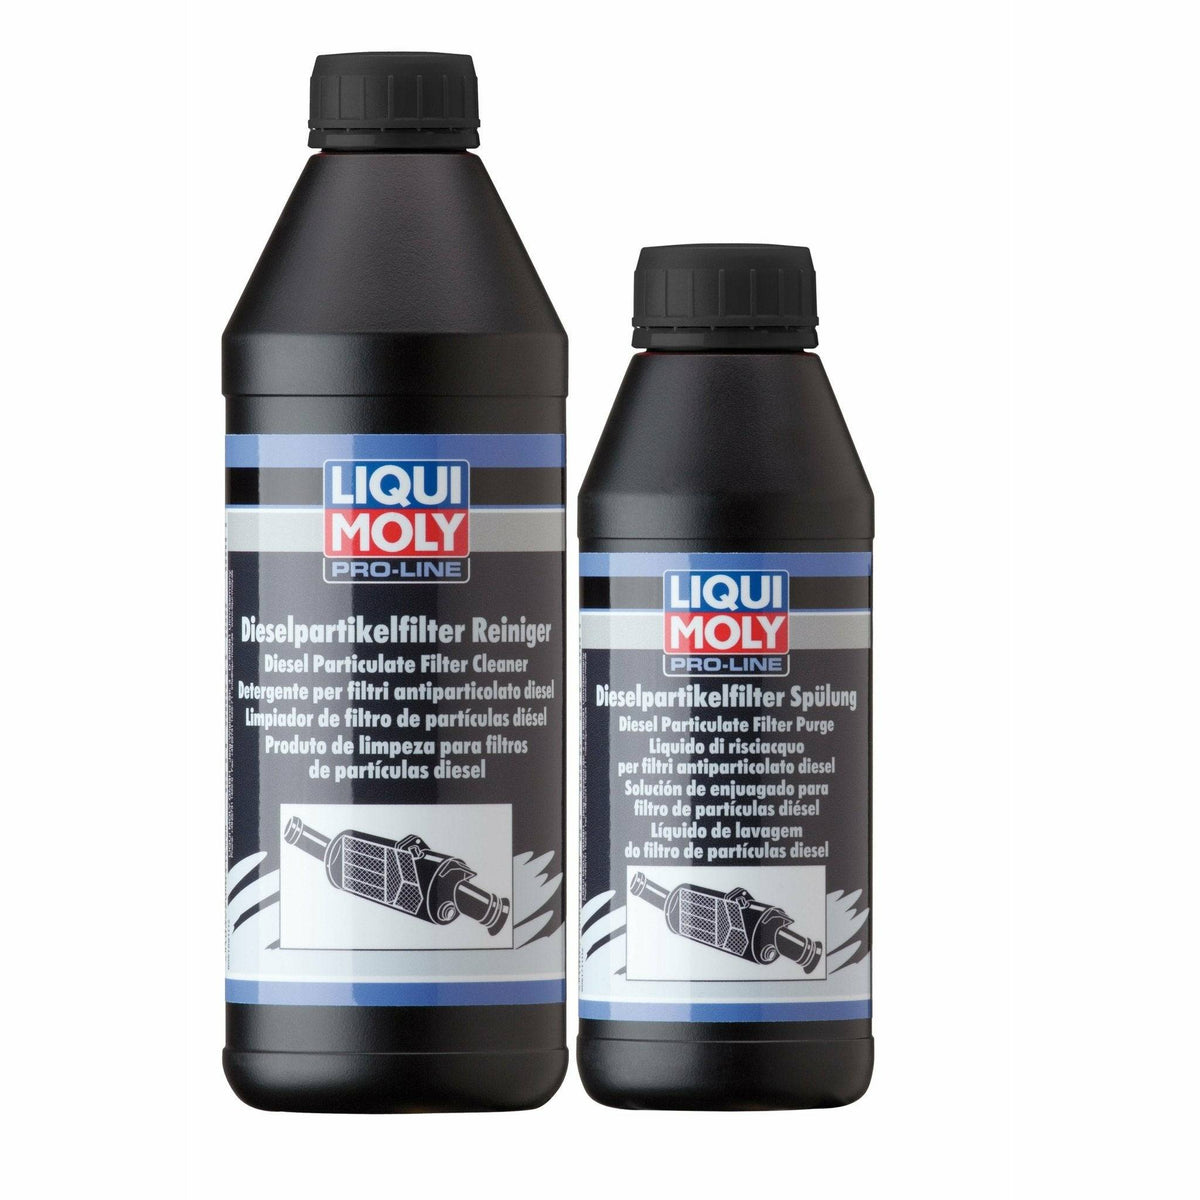  LIQUI MOLY Pro-Line Diesel Particulate Filter Cleaner, 1 L, Quick cleaner